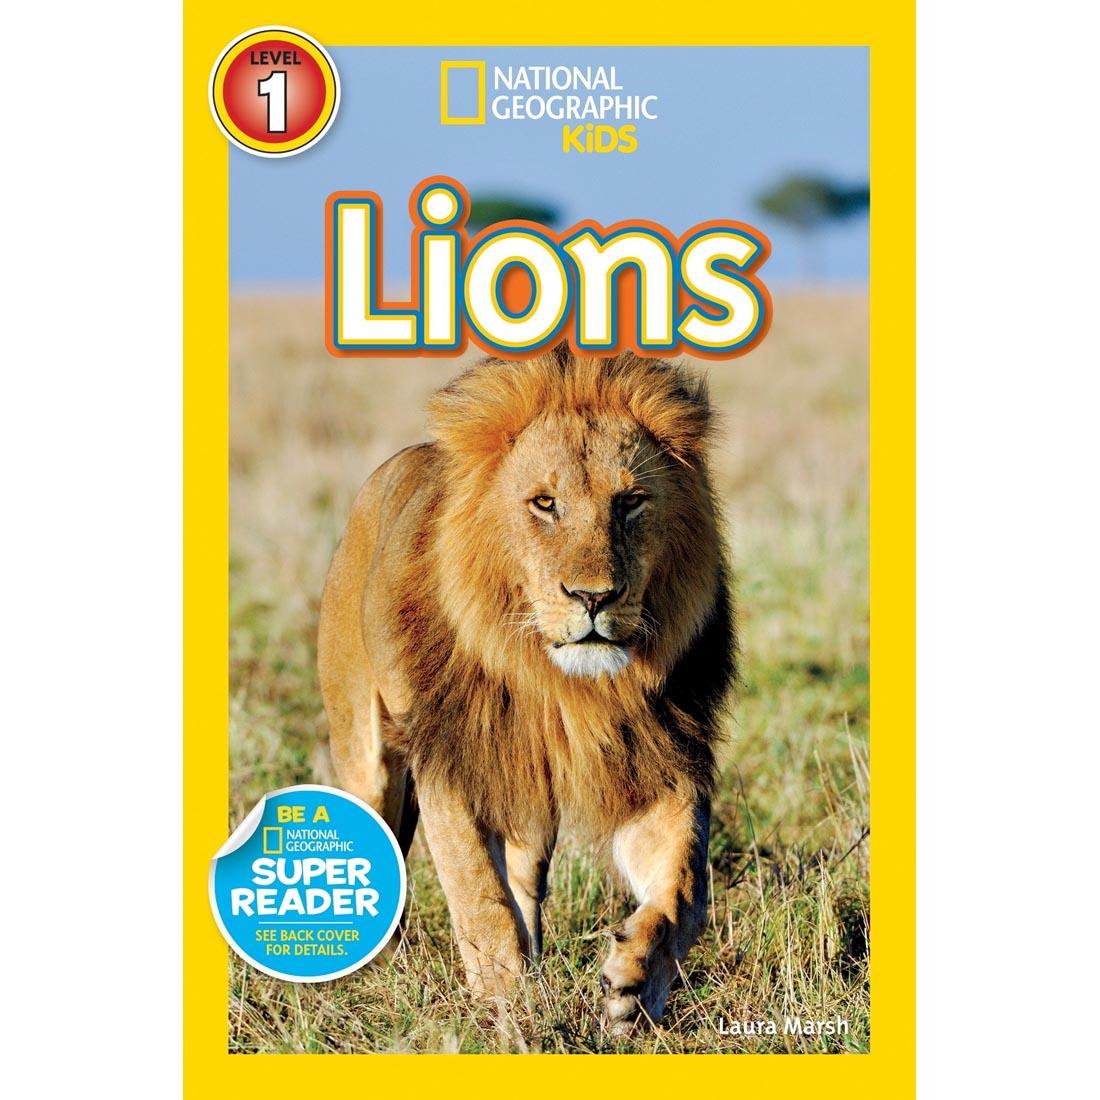 Lions Level 1 National Geographic Reader